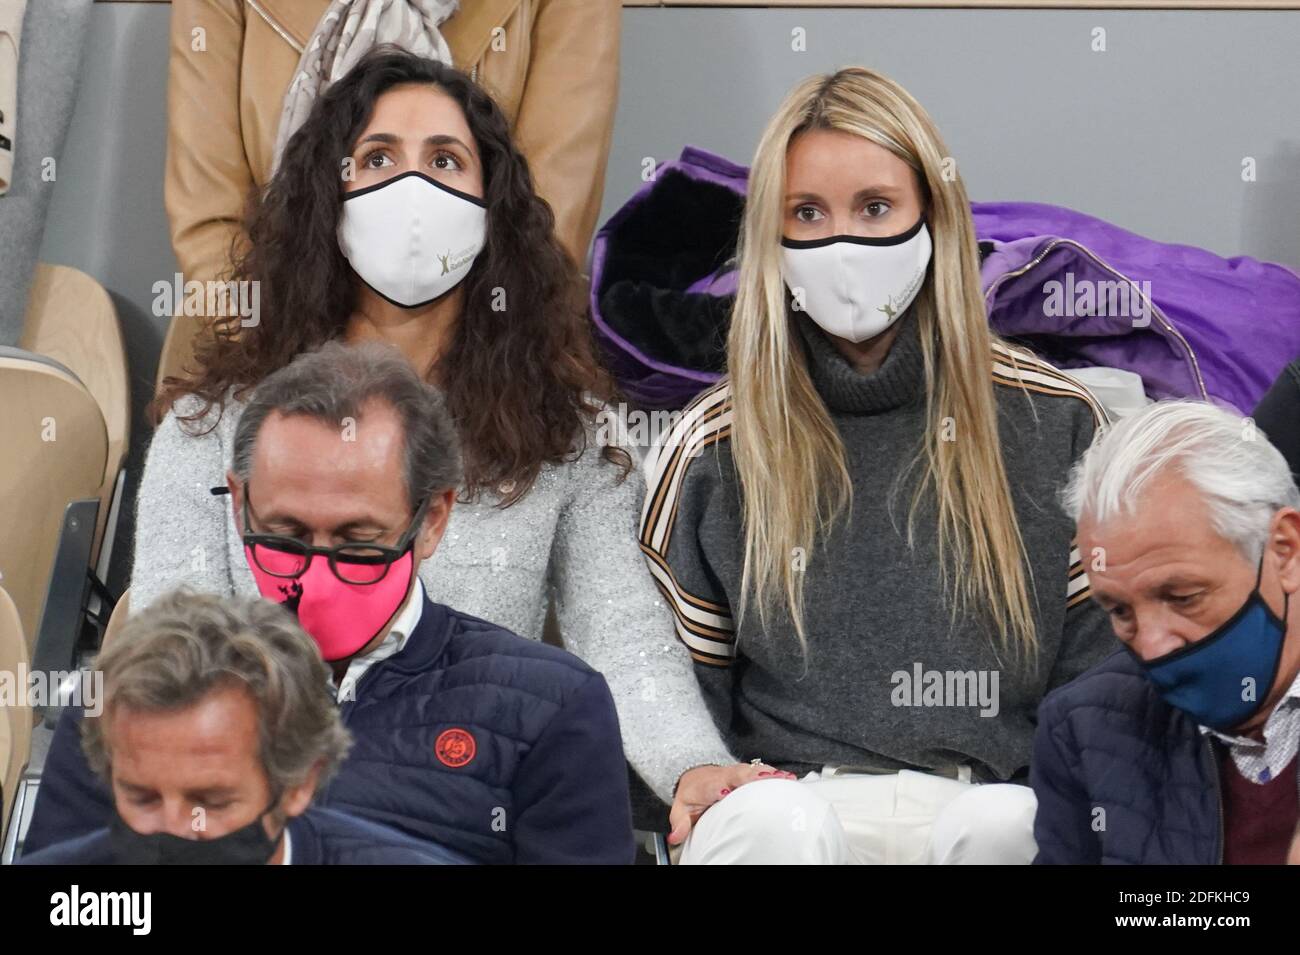 Rafael Nadal's wife, Xisca Perello and Nadal's sister, Maria Isabel attend  the Singles Final on Court Philippe-Chatrier during the French Tennis Open  Tennis at Roland Garros stadium on October 11, 2020 in